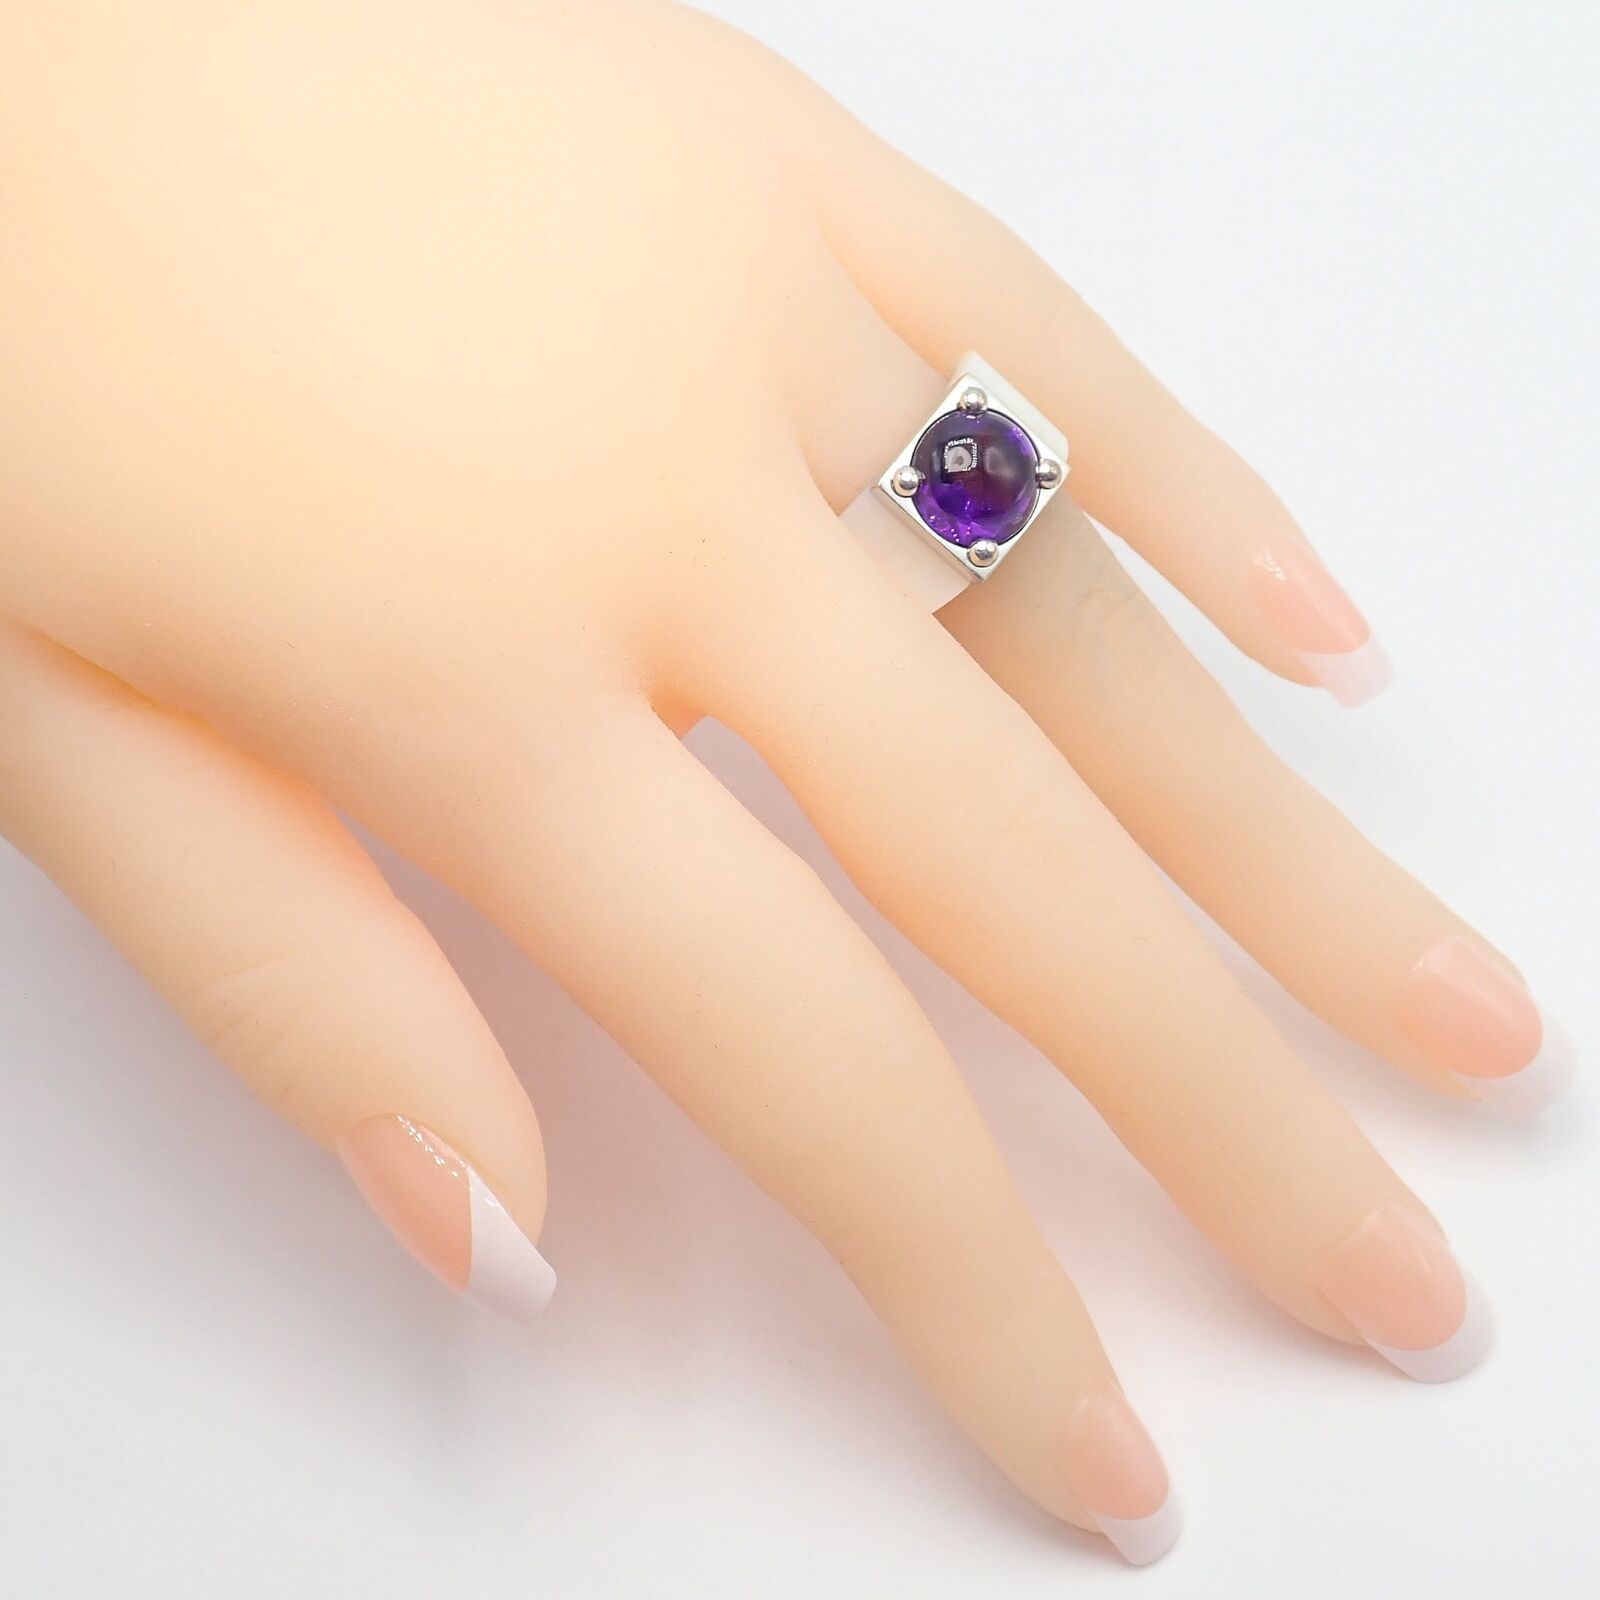 Van Cleef & Arpels Jewelry & Watches:Fine Jewelry:Rings Rare! Authentic Van Cleef & Arpels 18k White Gold Amethyst Mother of Pearl Ring